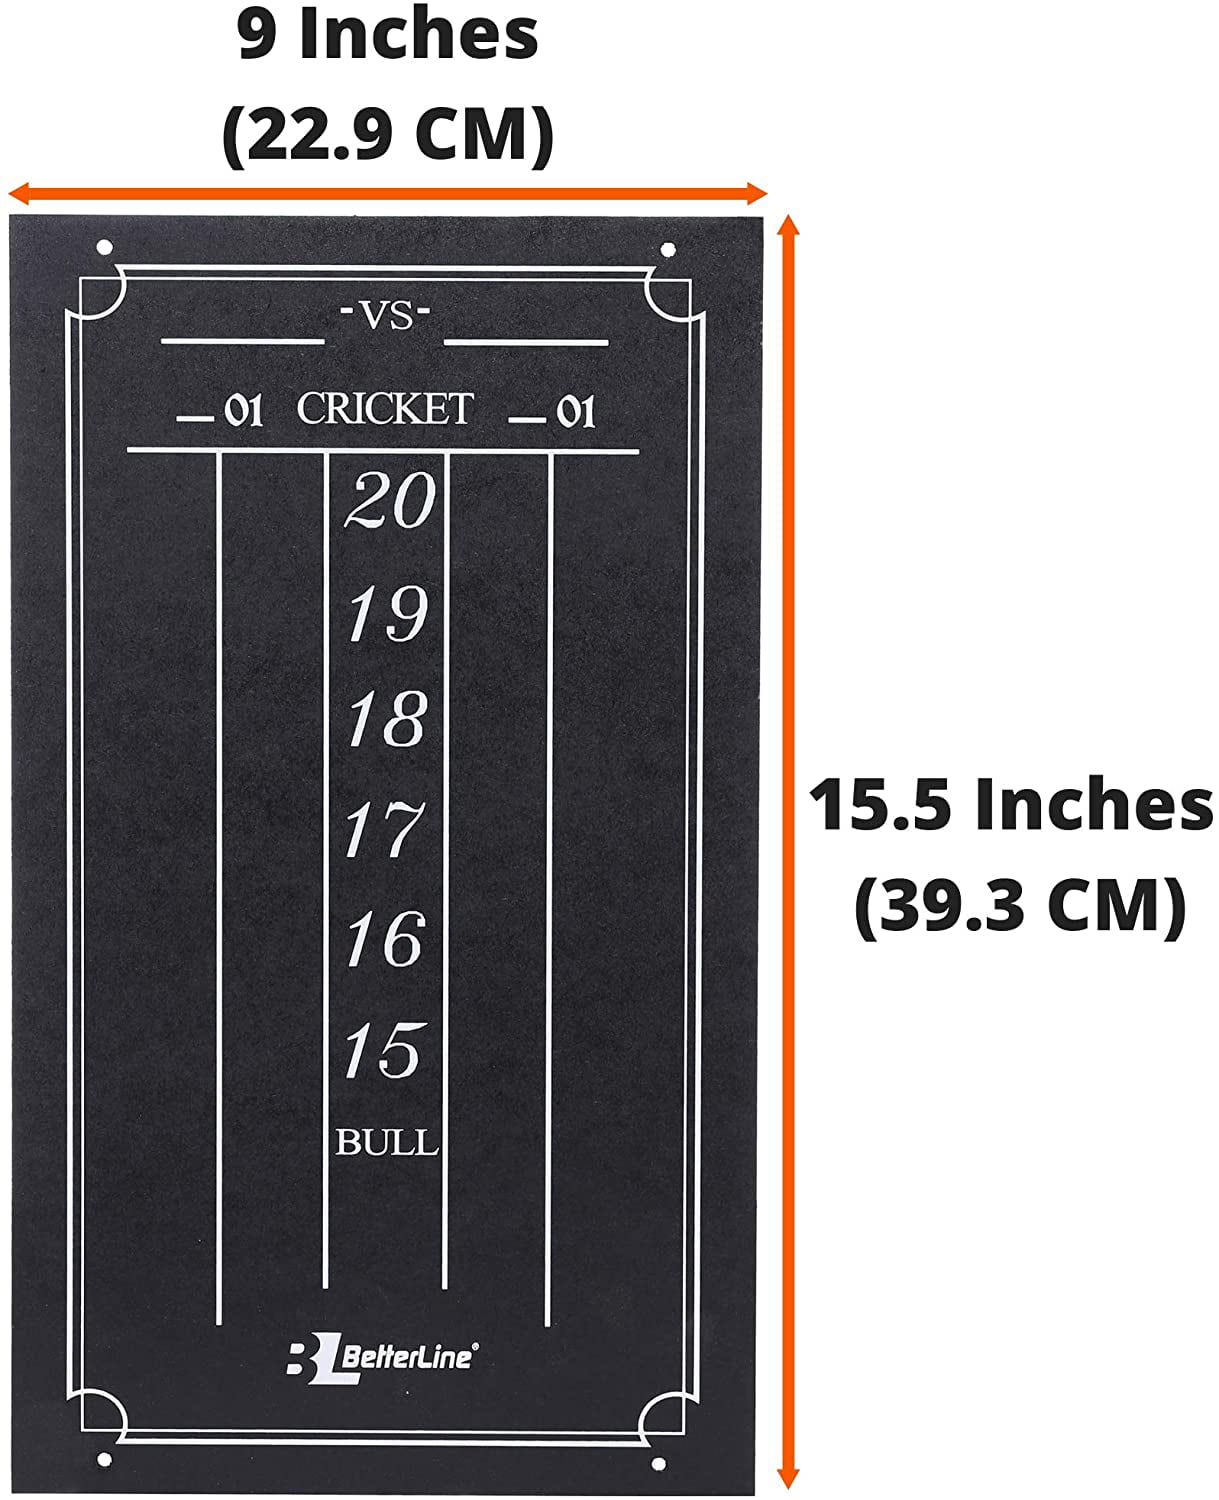 Large Professional Scoreboard Chalkboard for Cricket and 01 Darts Games -  15.5